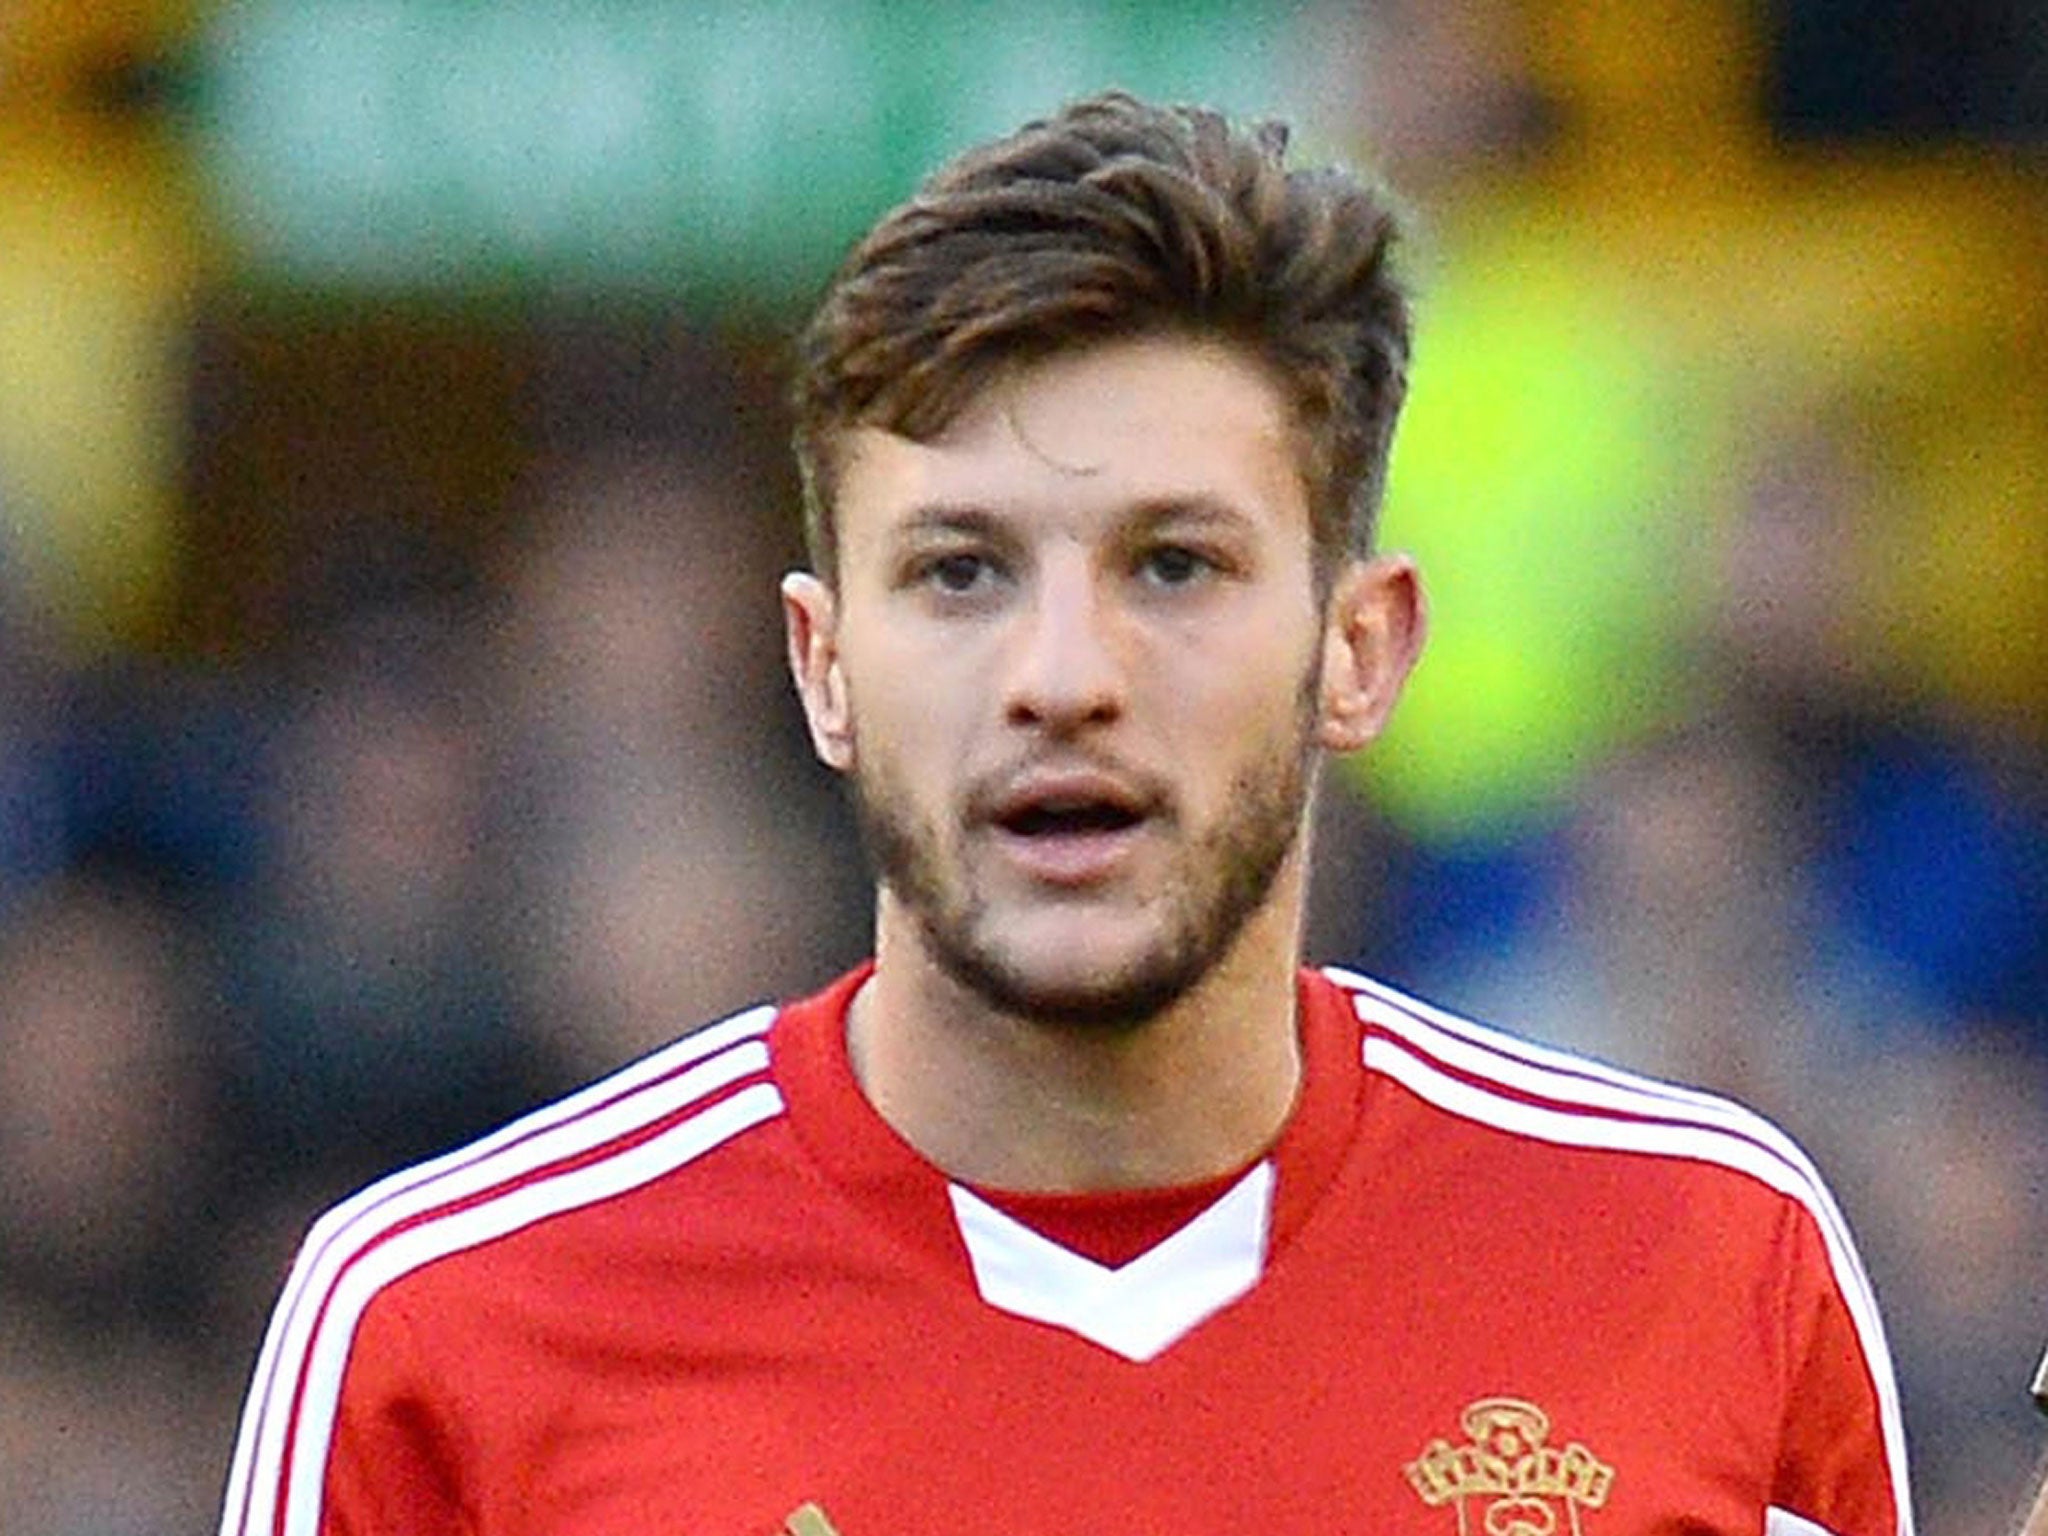 Adam Lallana was upset by the ridicule he received after the complaint about Mark Clattenburg